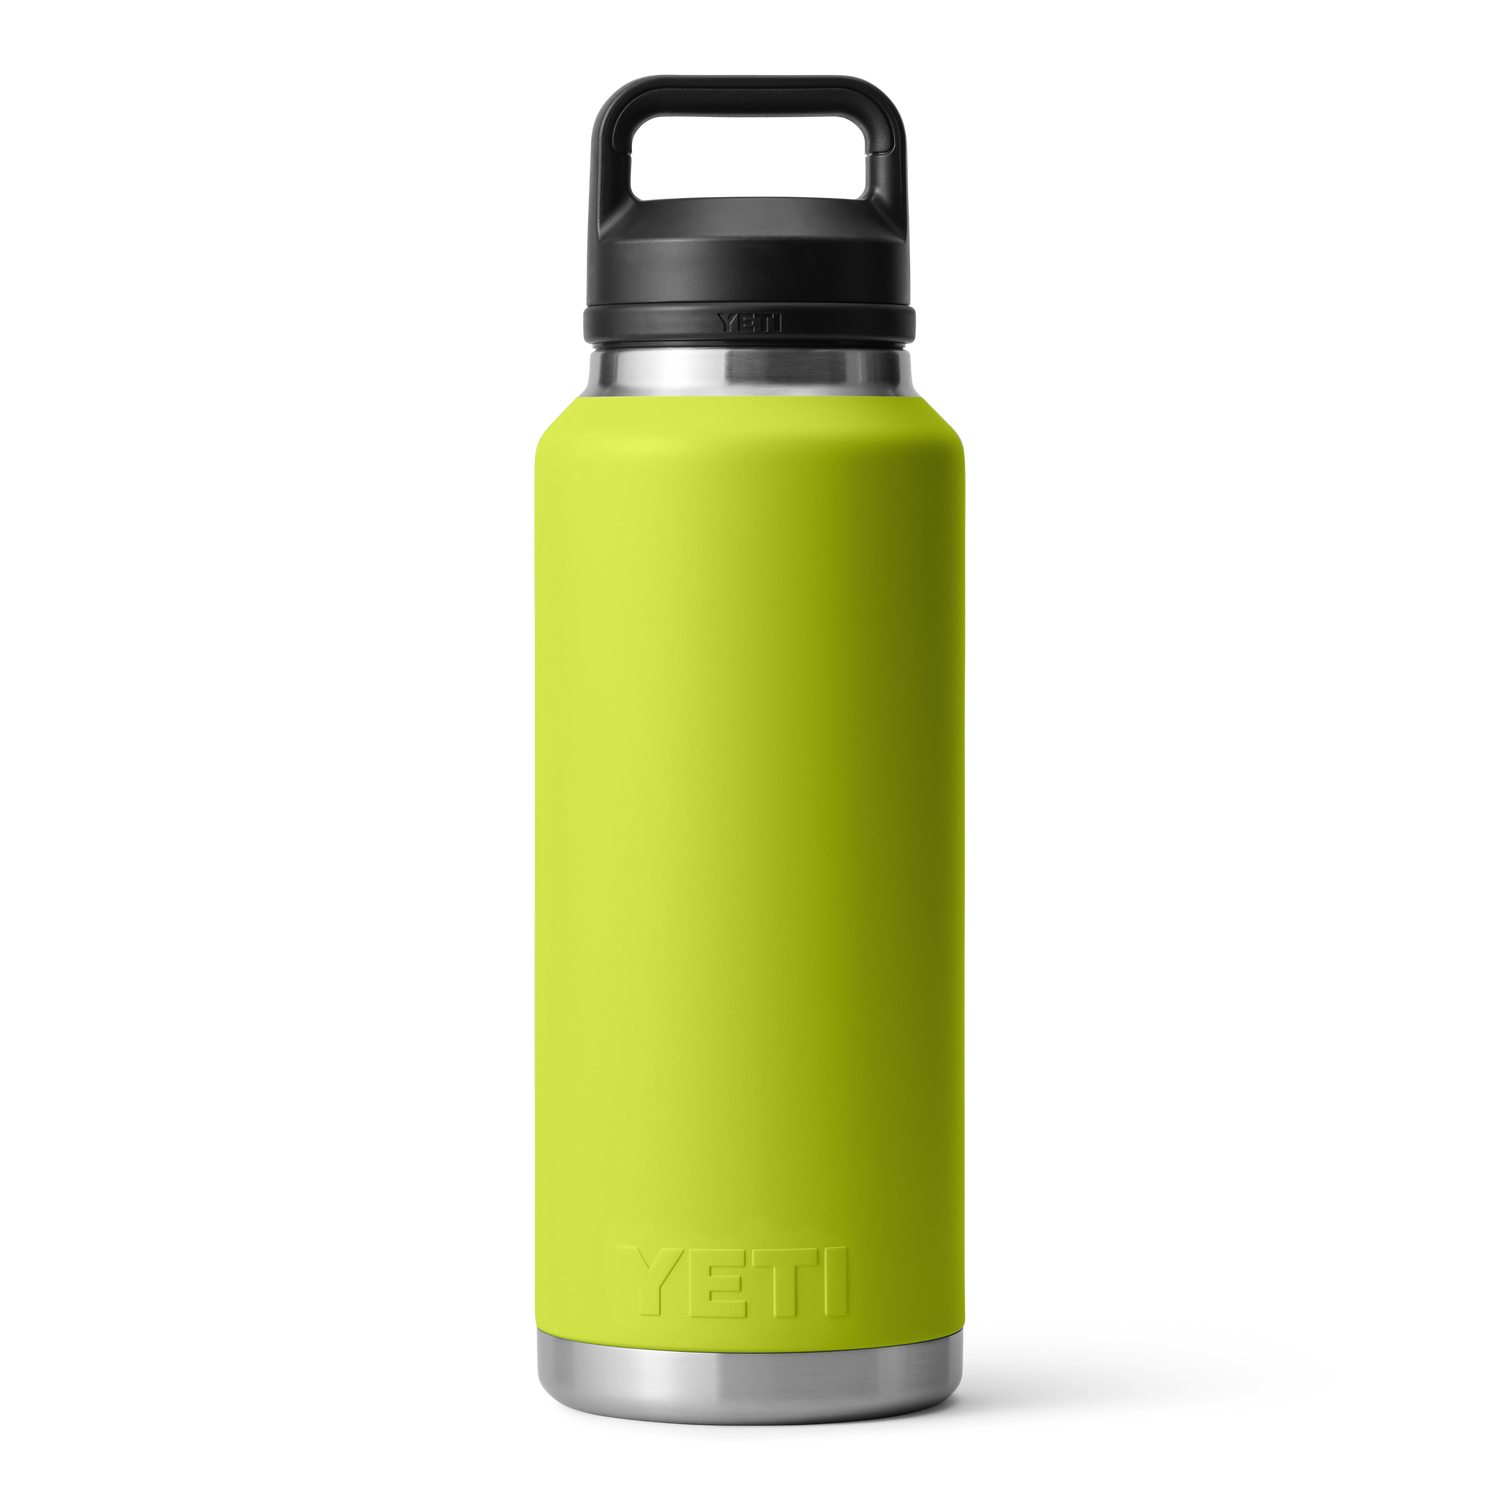 Yeti Is Offering Free Tumbler and Bottle Customization for